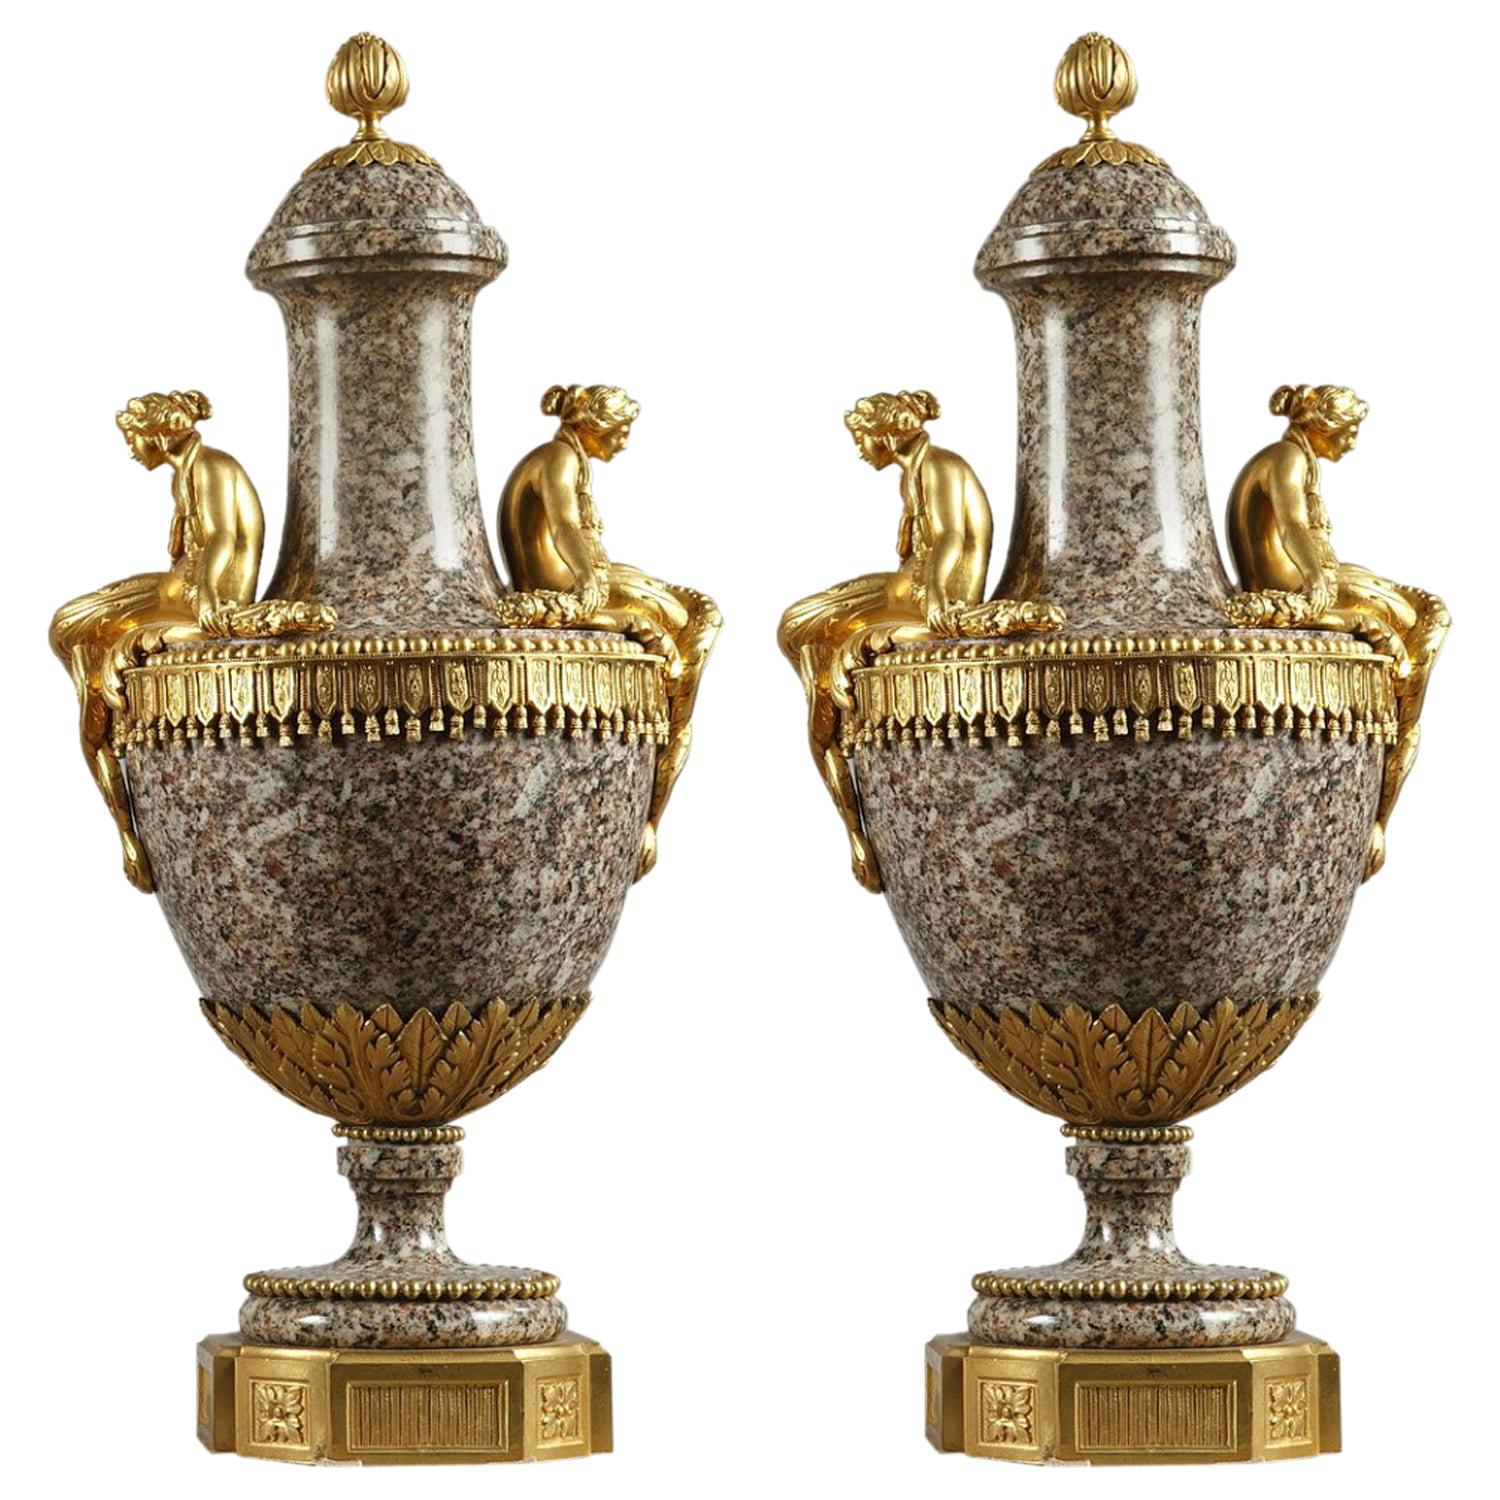 Pair of Mid-19th Century Vases in Ural Granite and Gilt Bronze, Louis XVI Style For Sale